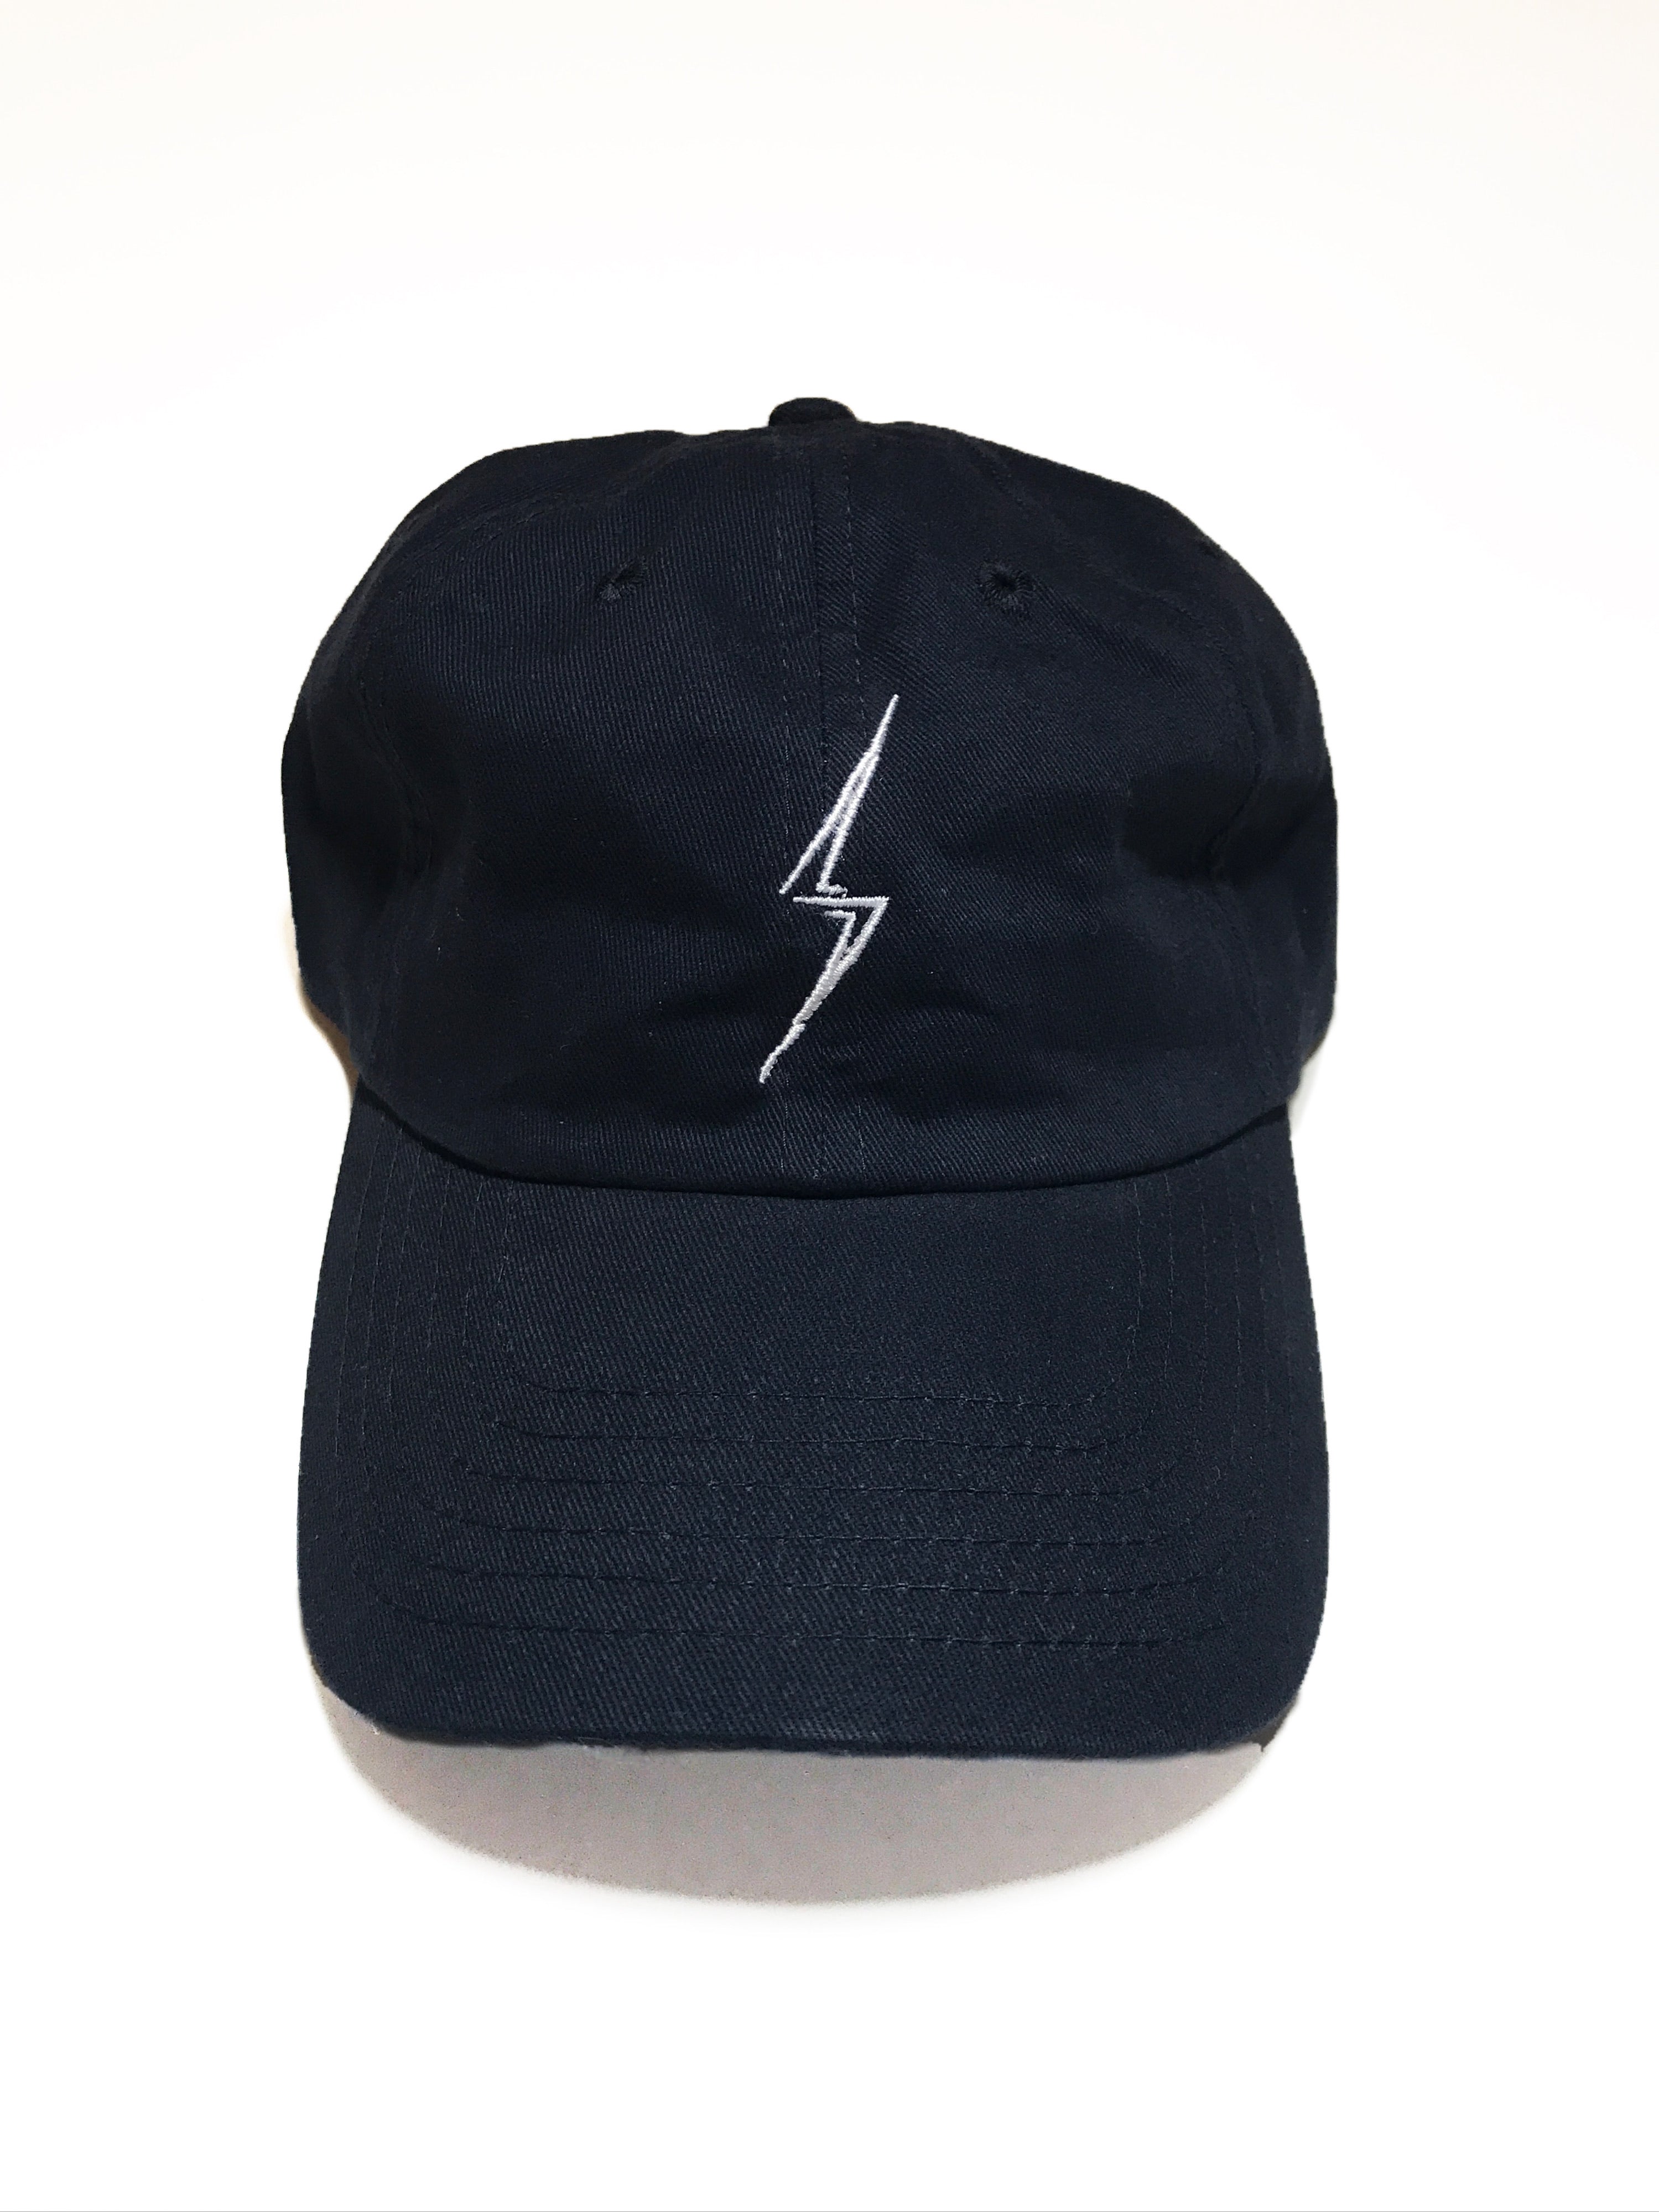 Classic Bolt Dad Hat-Navy/White